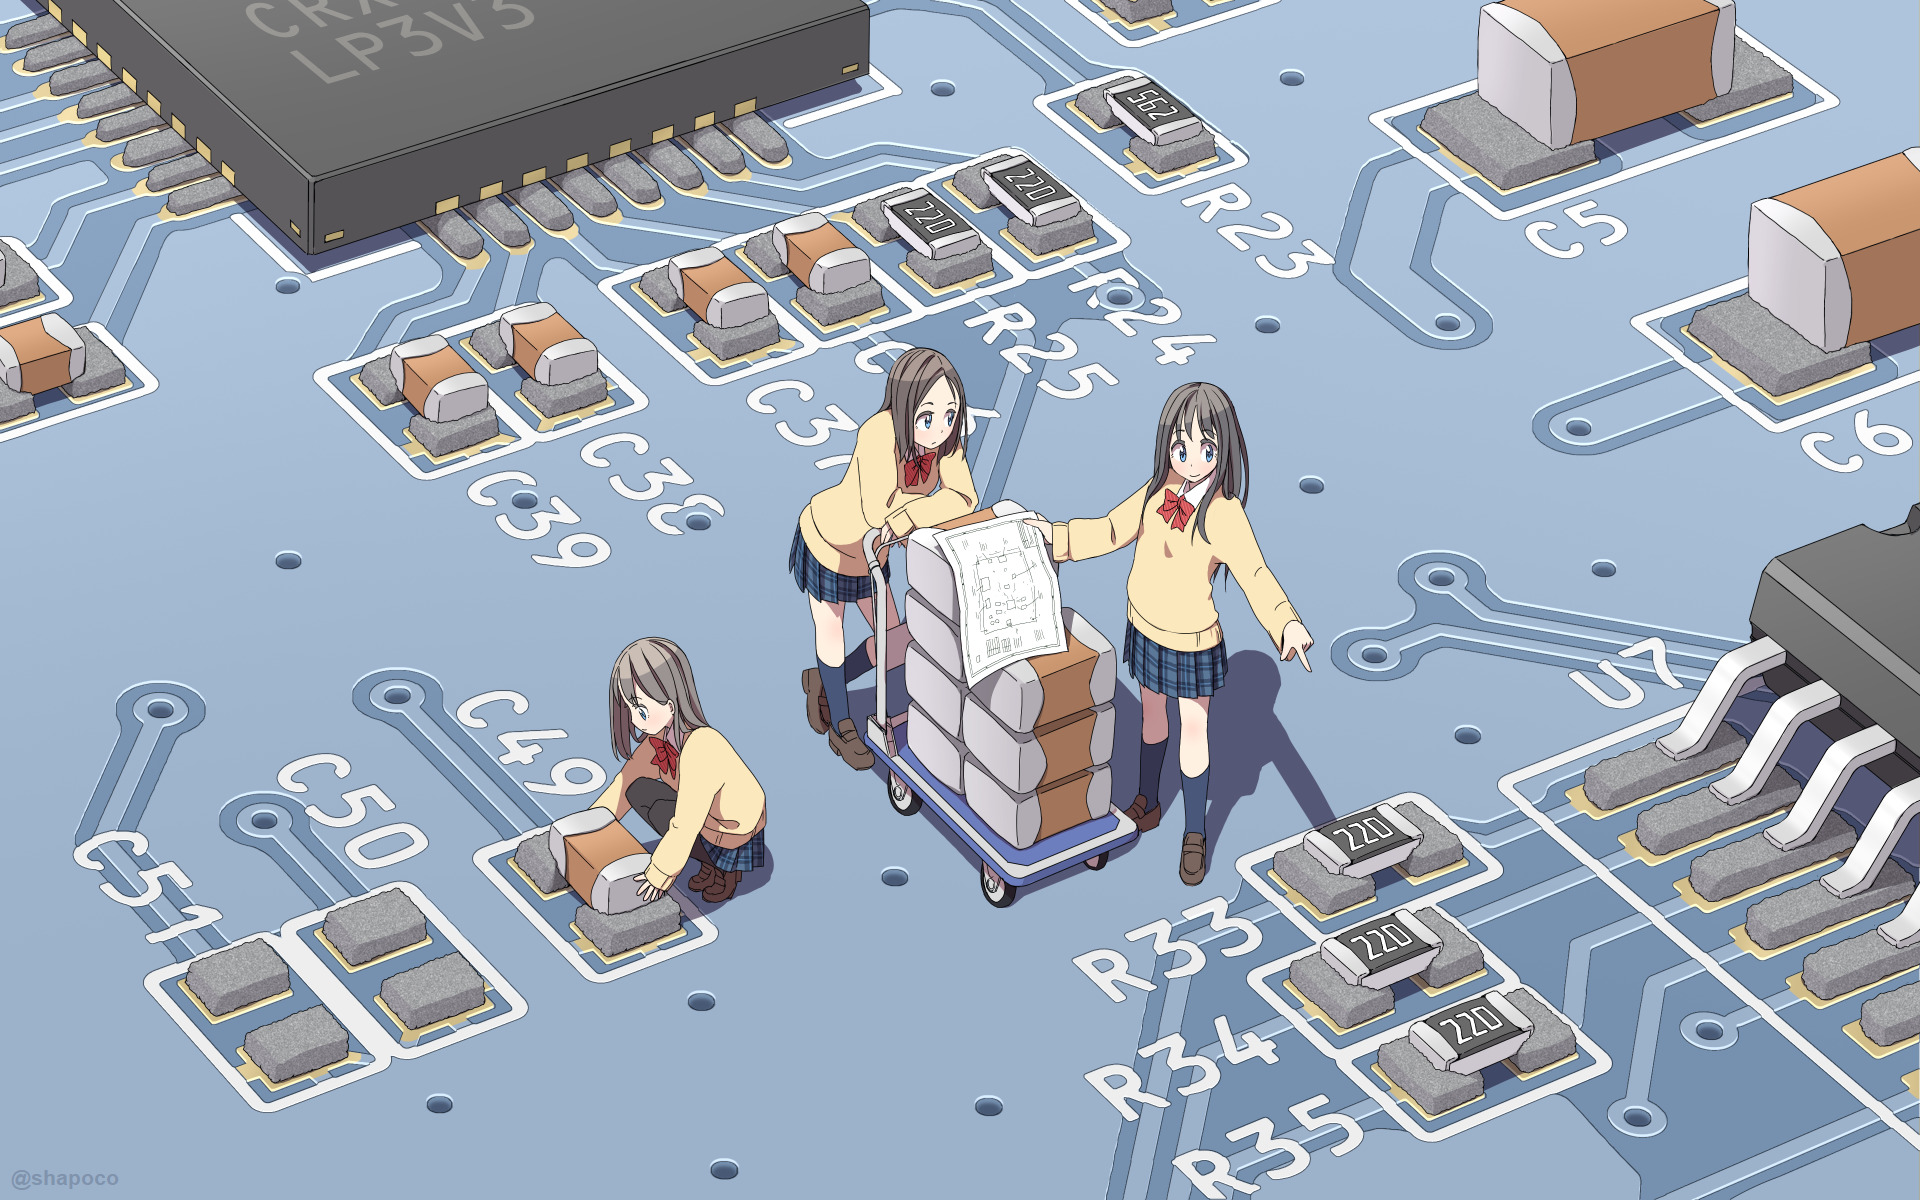 Microscopic anime girls placing SMD parts on a blue
PCB